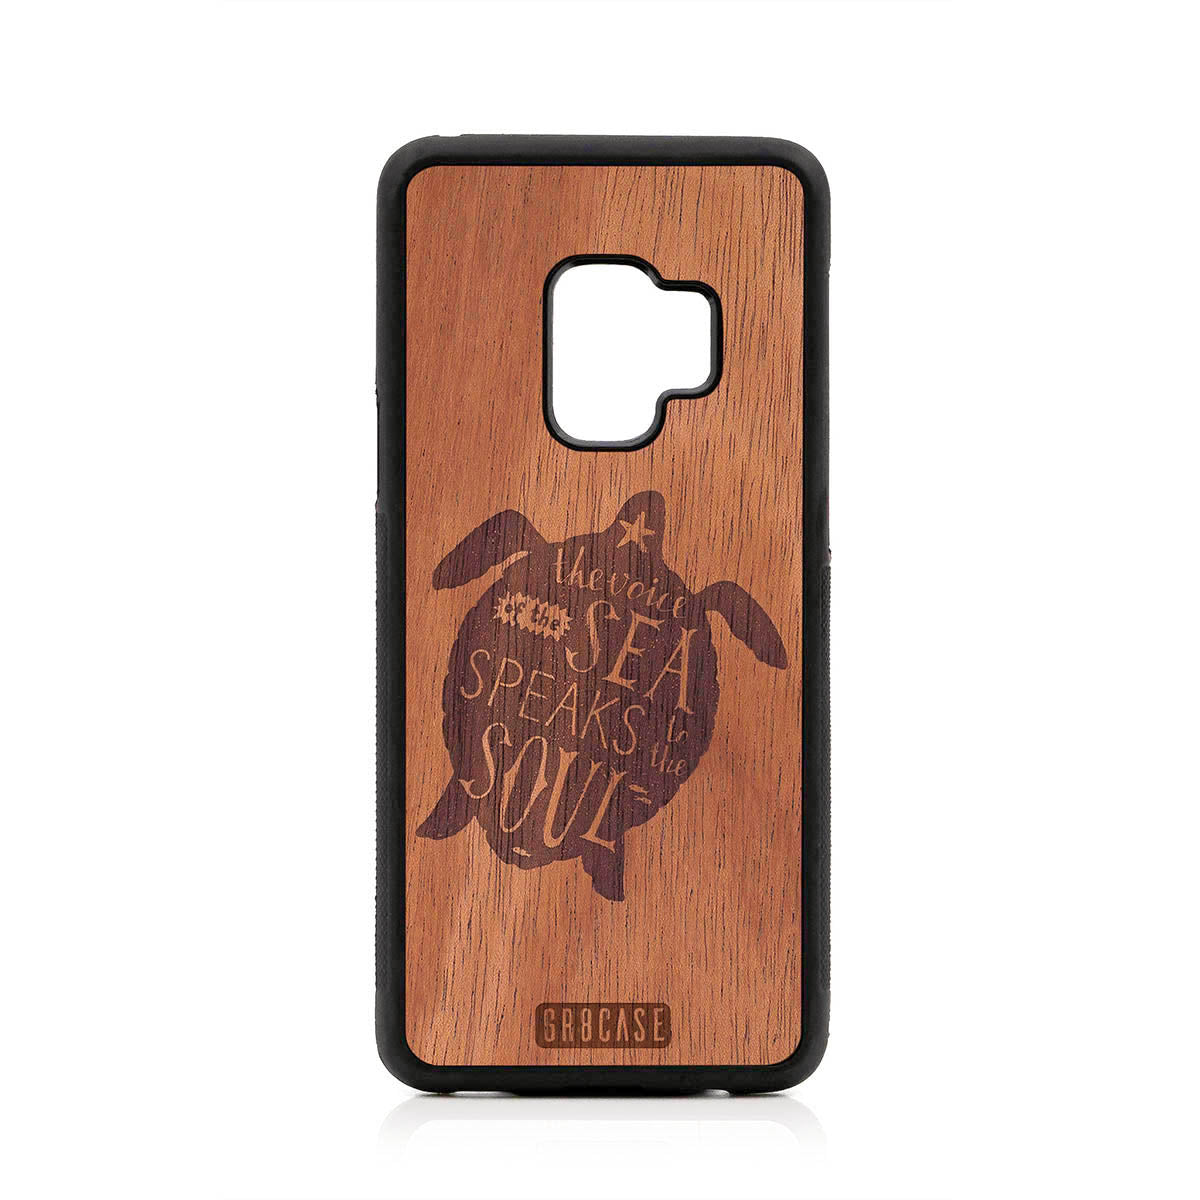 The Voice Of The Sea Speaks To The Soul (Turtle) Design Wood Case For Samsung Galaxy S9